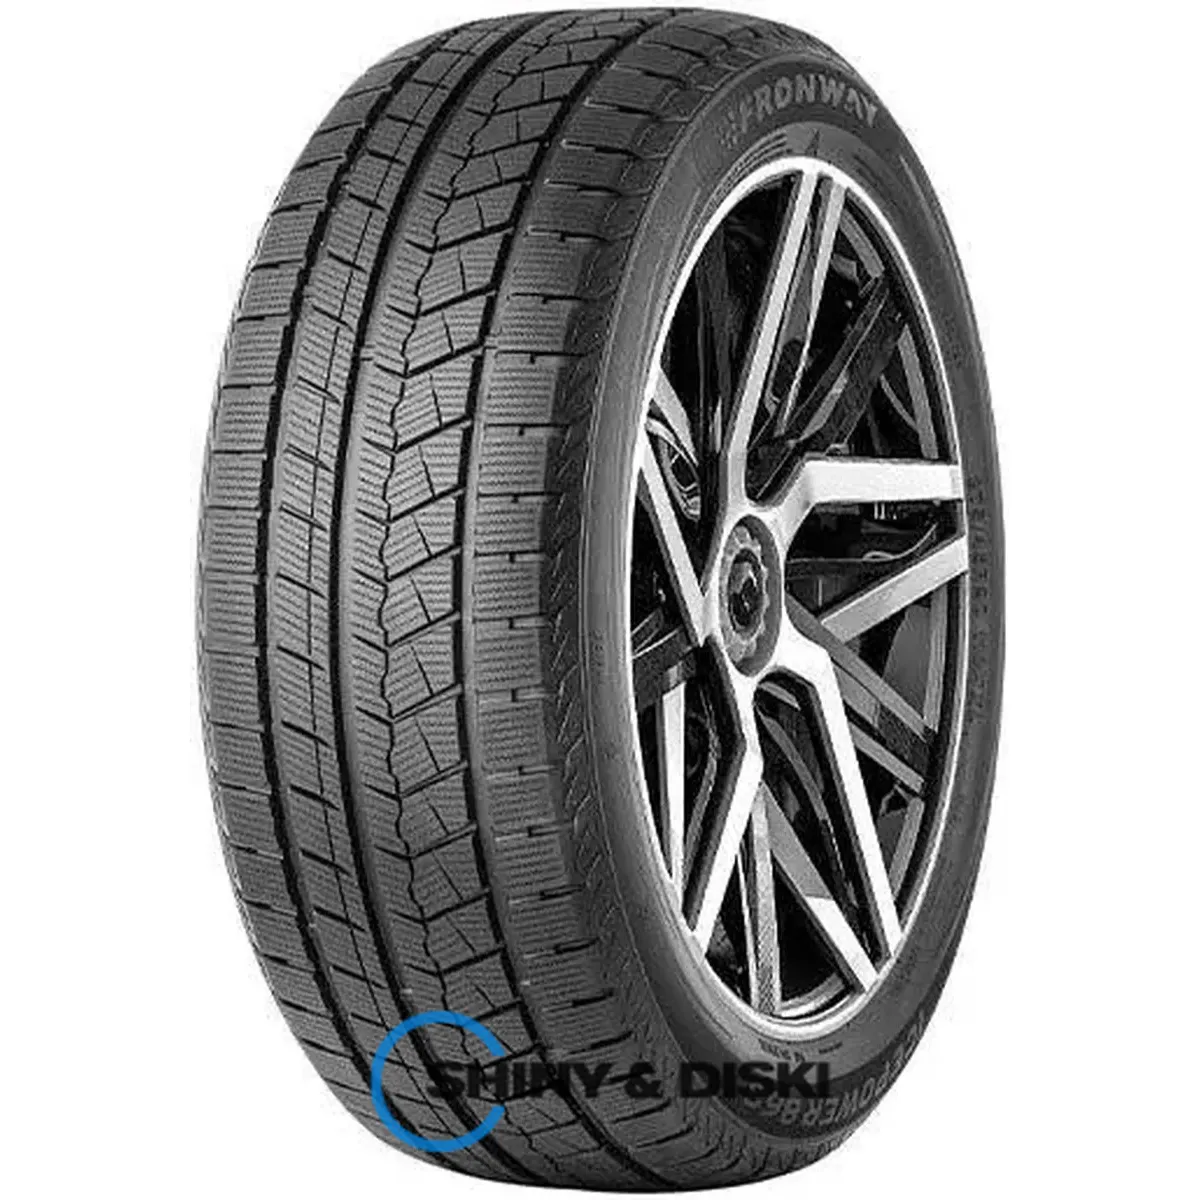 fronway icepower 868 235/60 r18 107h xl